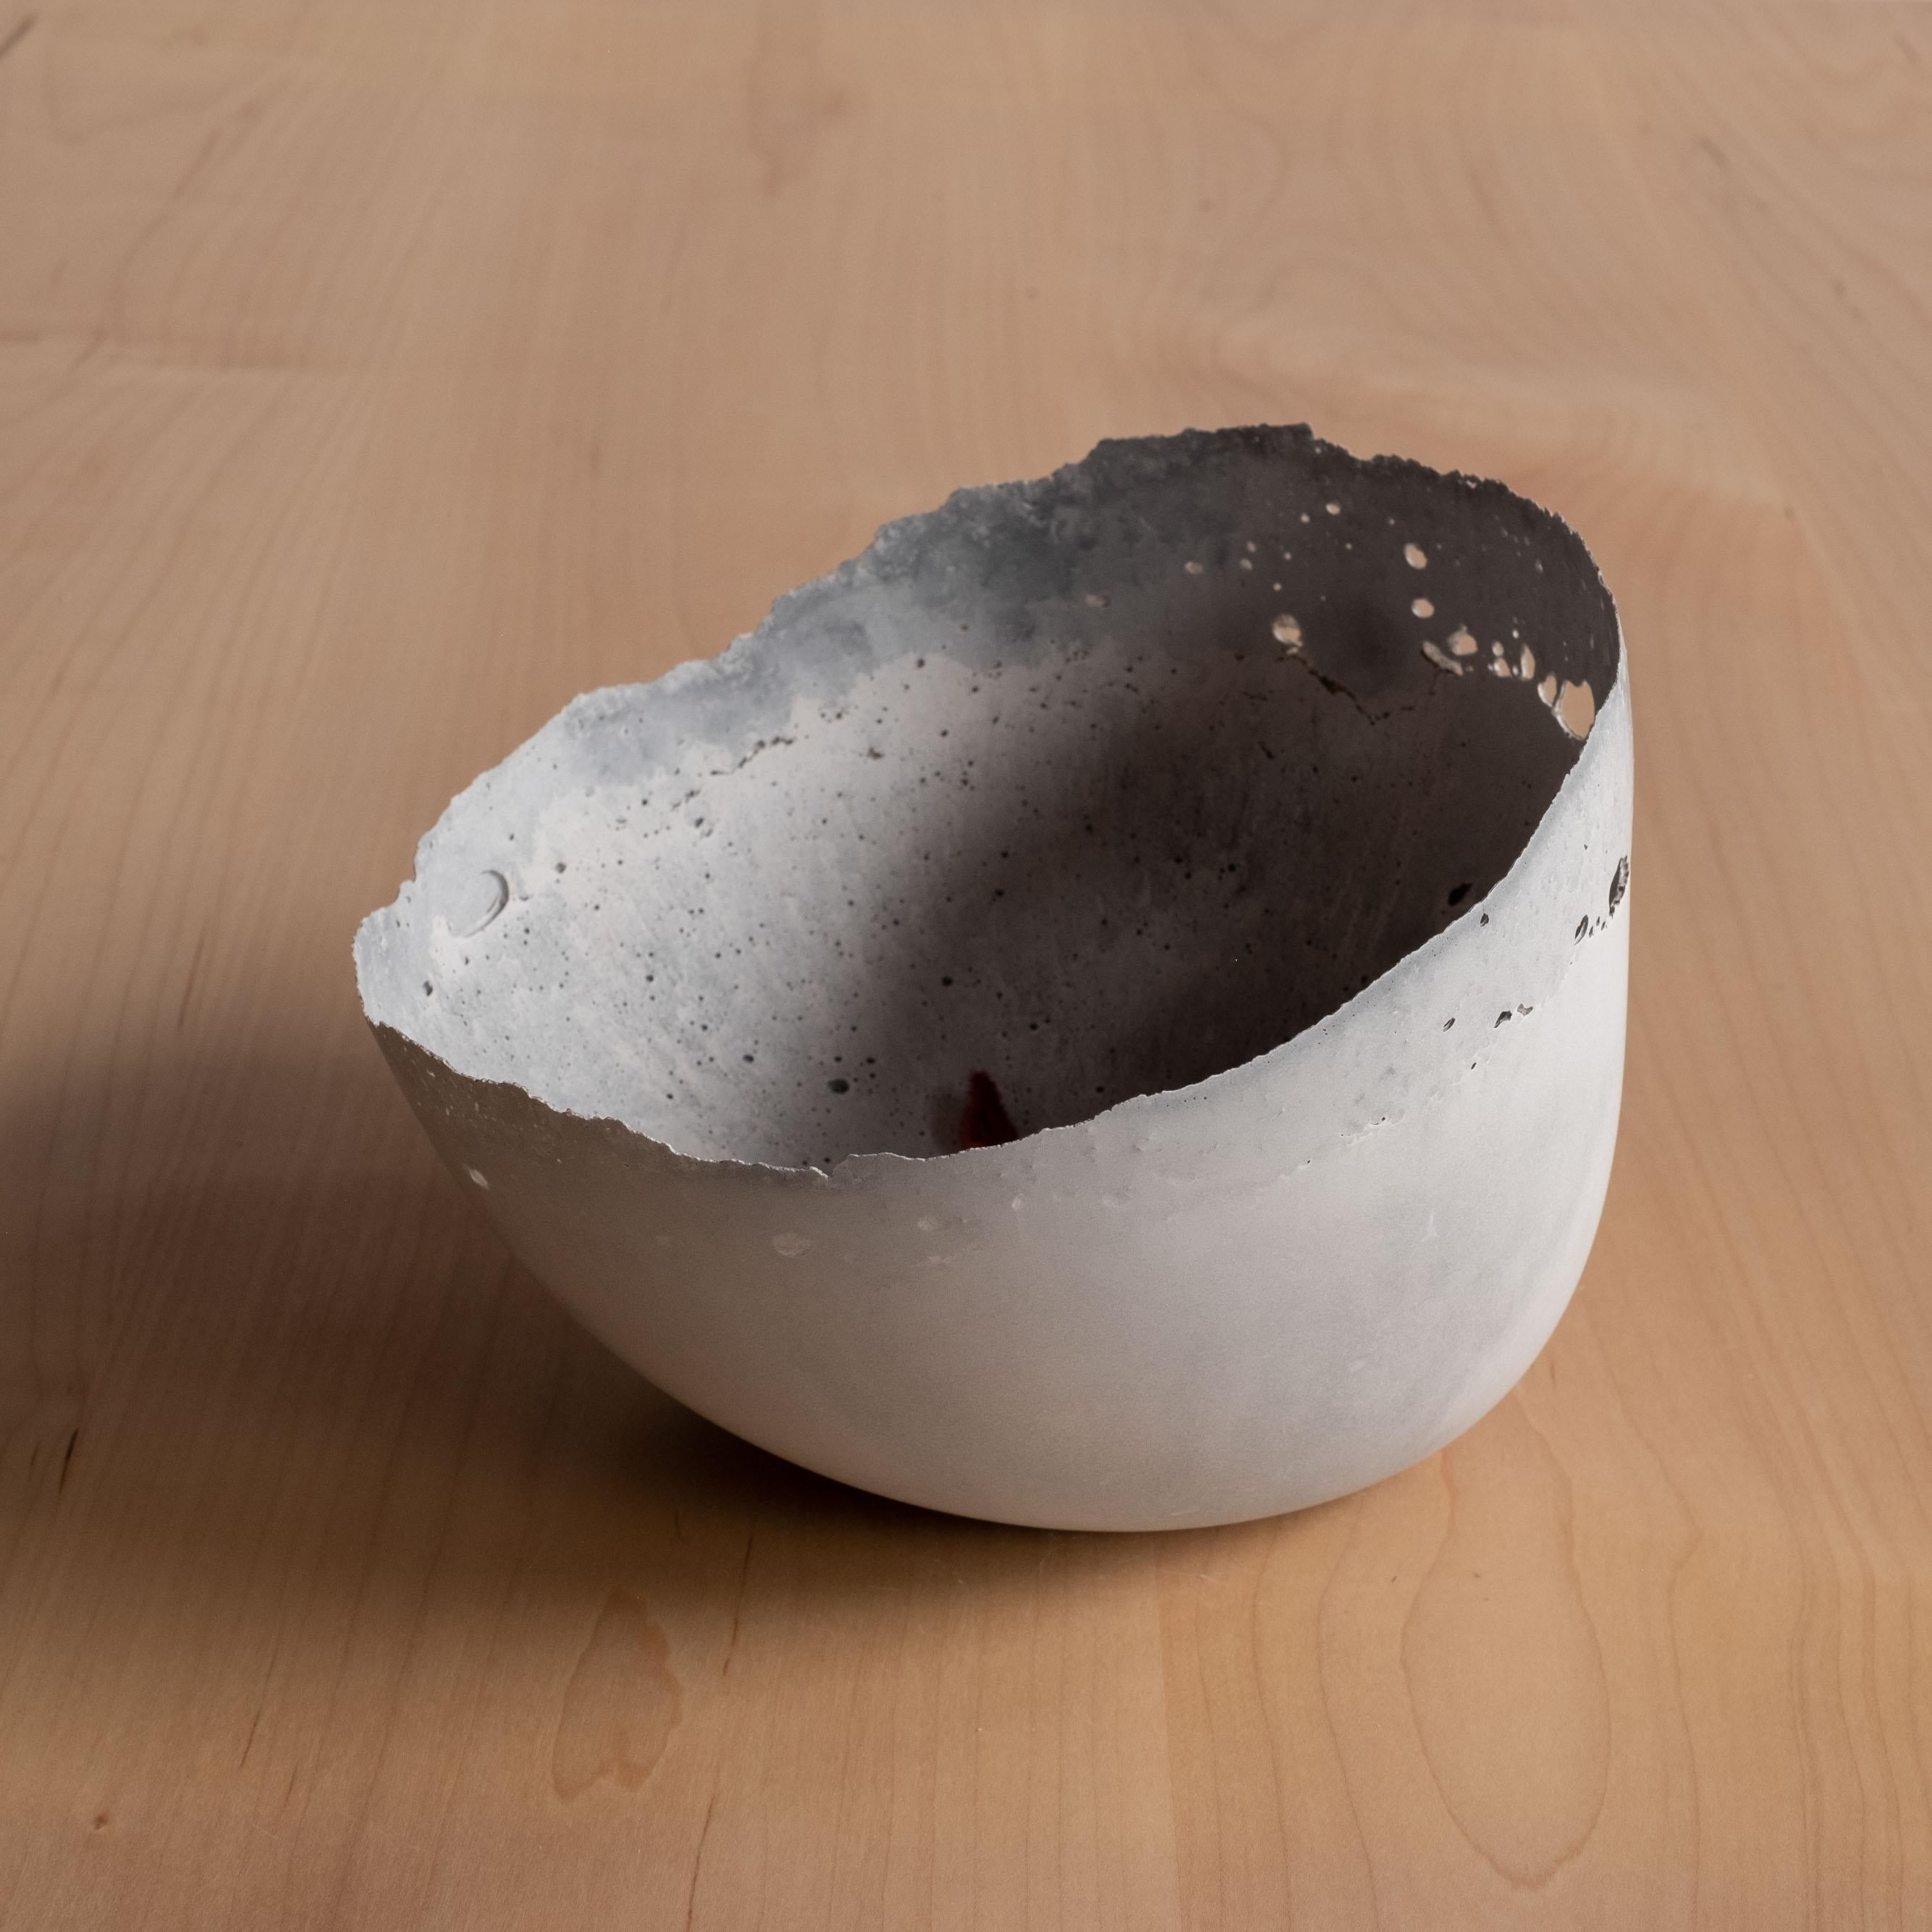 An edition of 150 unique bowls, the concrete Series by UMÉ Studio expresses the tension between heavy concrete and its delicate edge generated by hand pouring. While one assumes concrete should be strong and durable, it is, at its core, fragile.